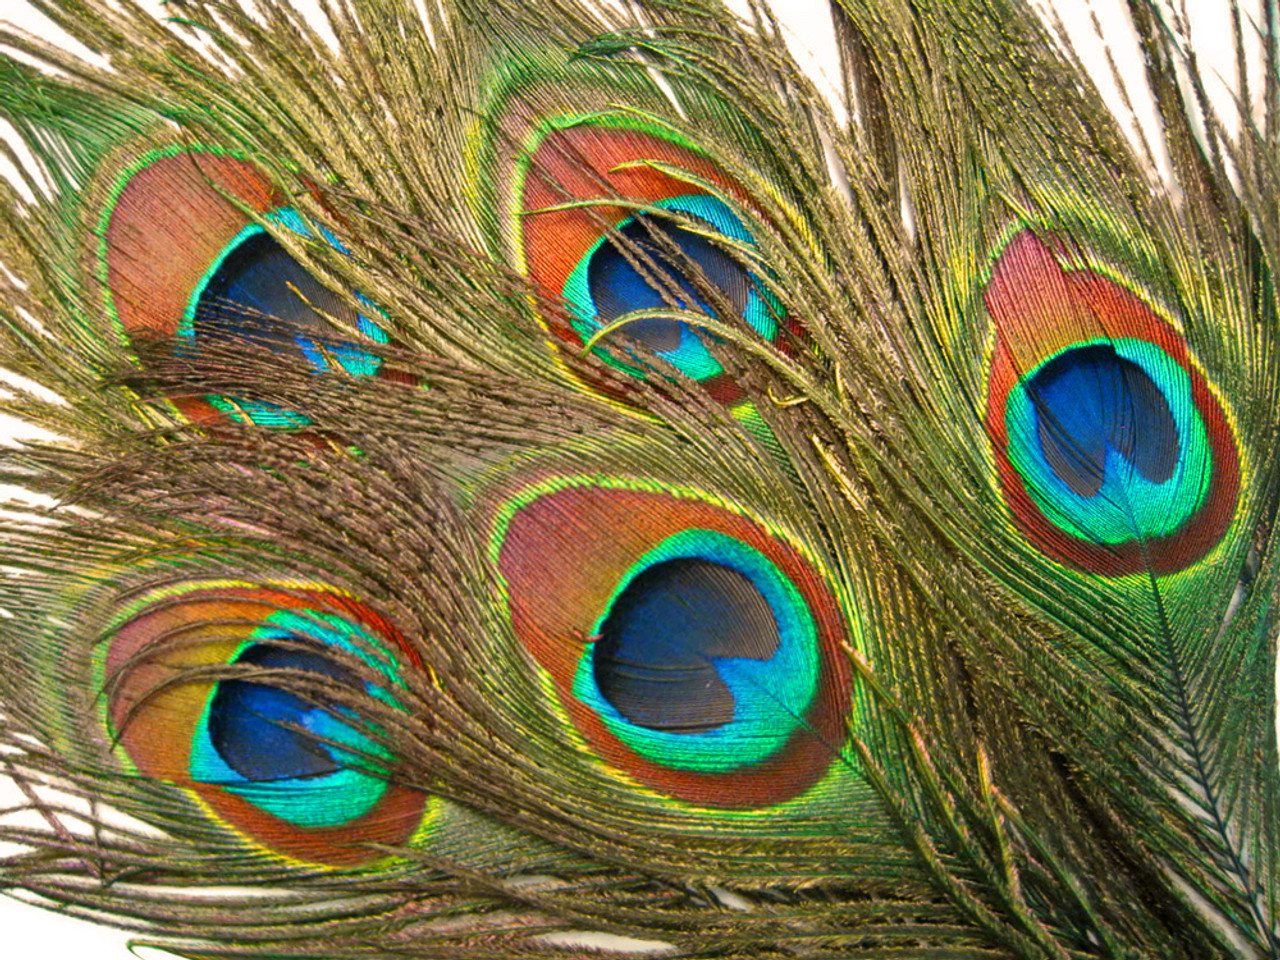 Peacock Feathers, Tail Feather, Peacock Wing Feathers, Shimmering